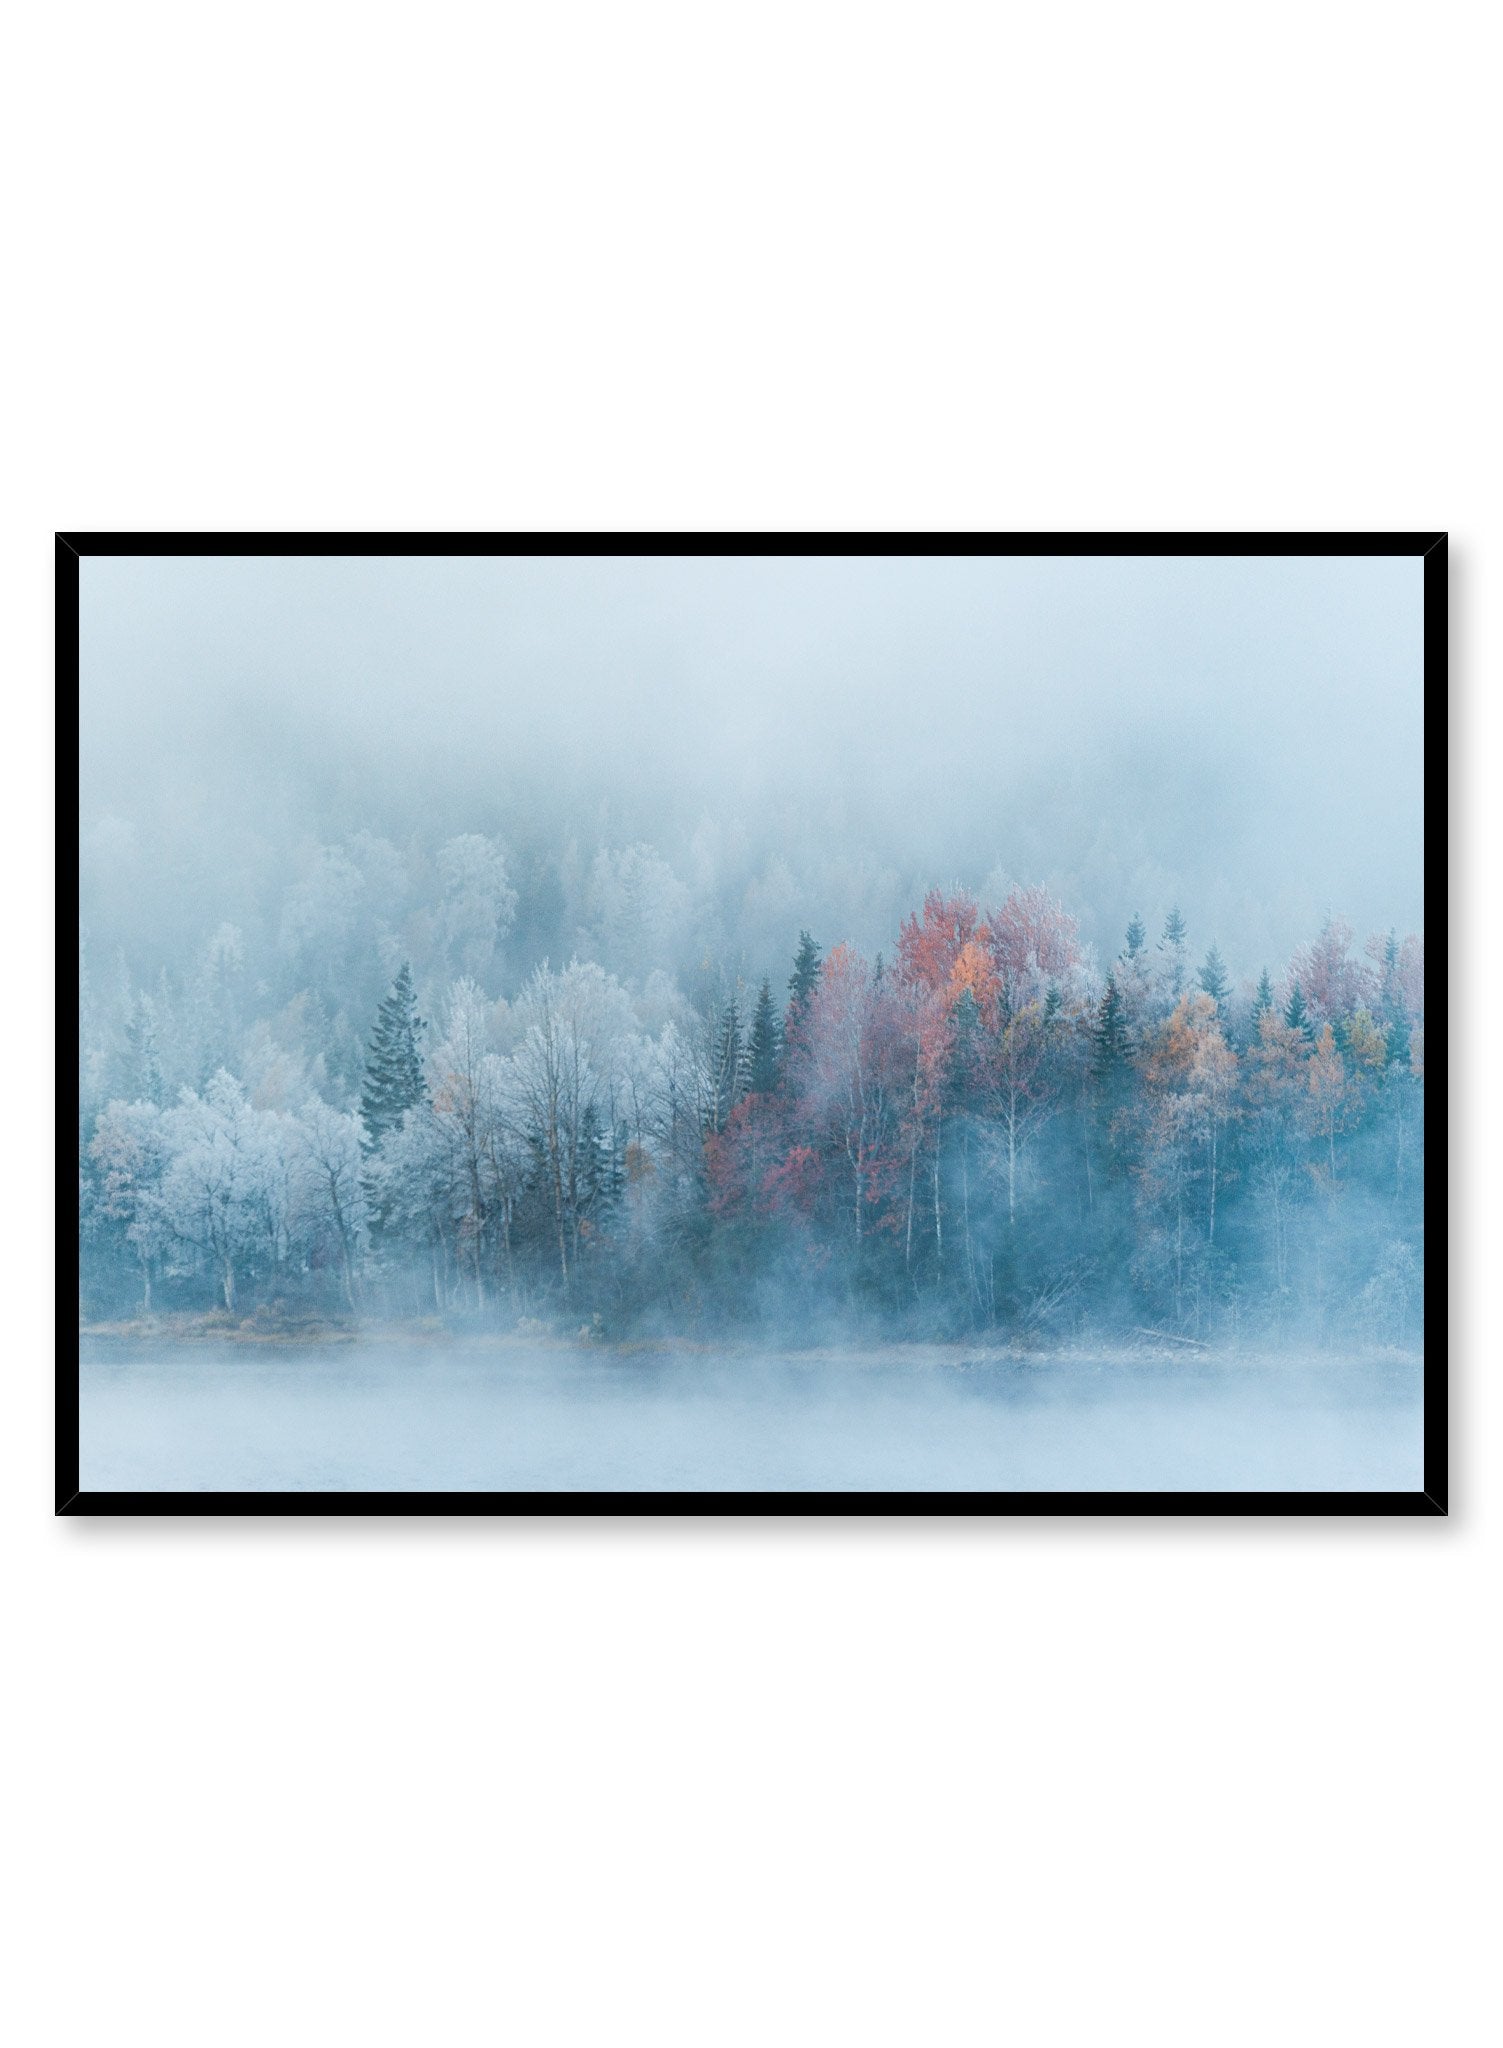 Landscape photography poster by Opposite Wall with trees in the mist